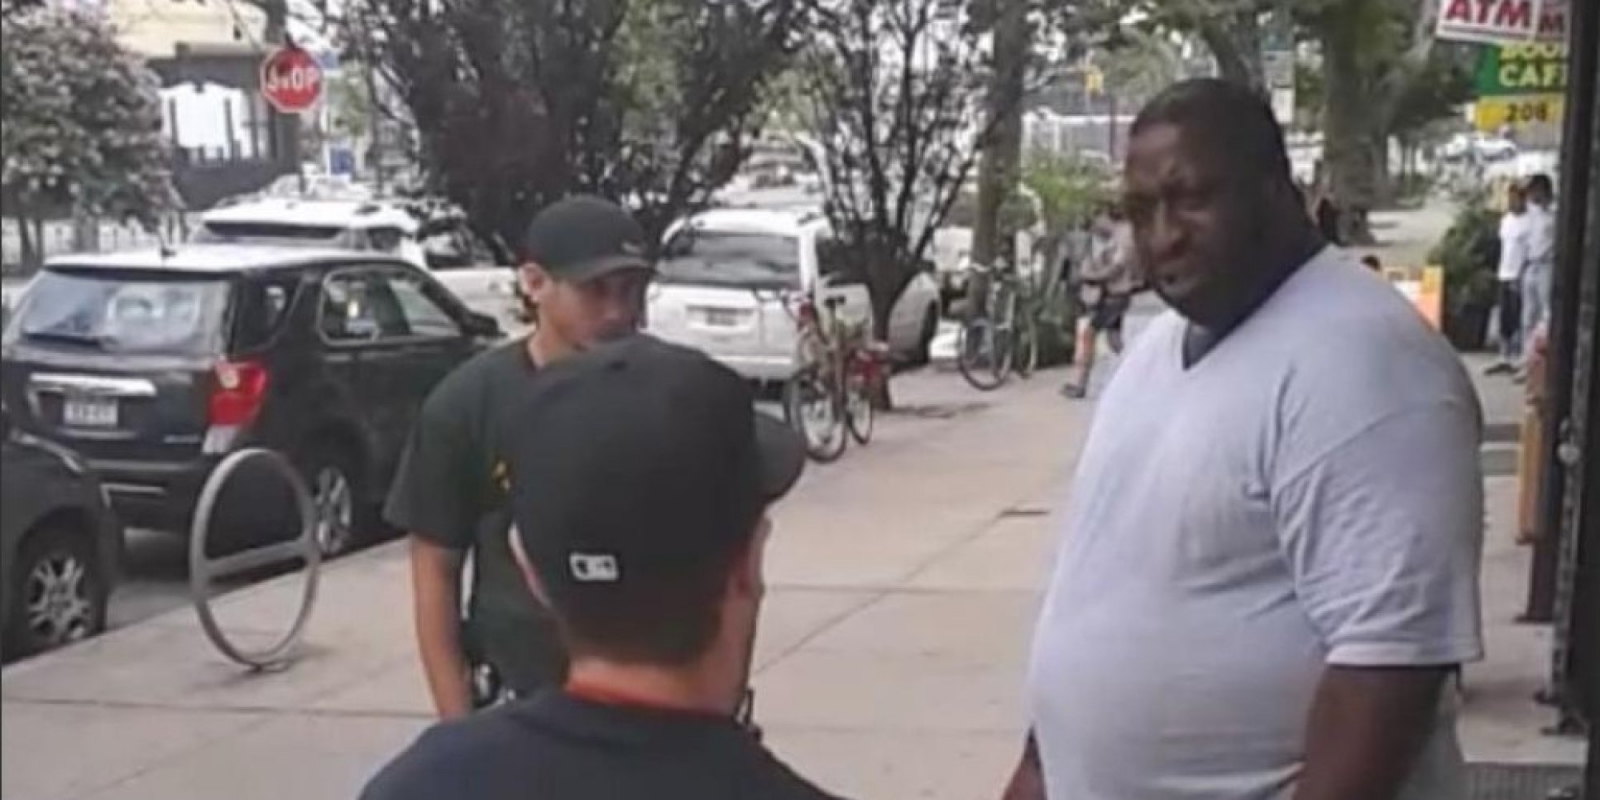 Eric Garner filmed remonstrating with NYPD officers before his arrest